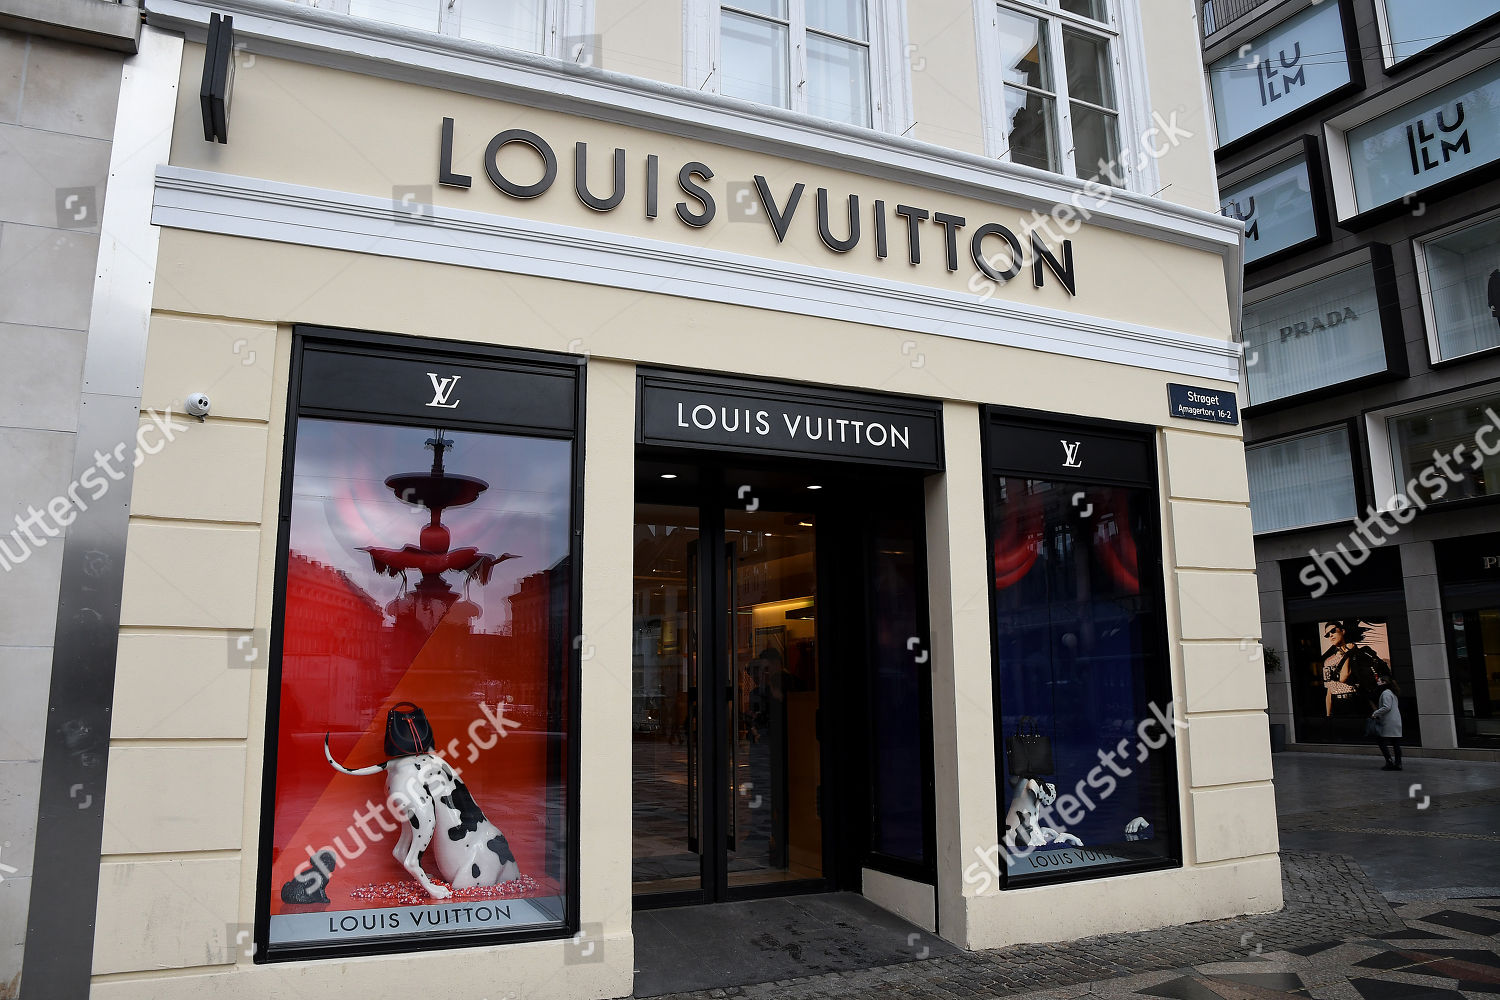 lækage nærme sig Stue Exterior Louis Vuitton store on stroget street Editorial Stock Photo -  Stock Image | Shutterstock